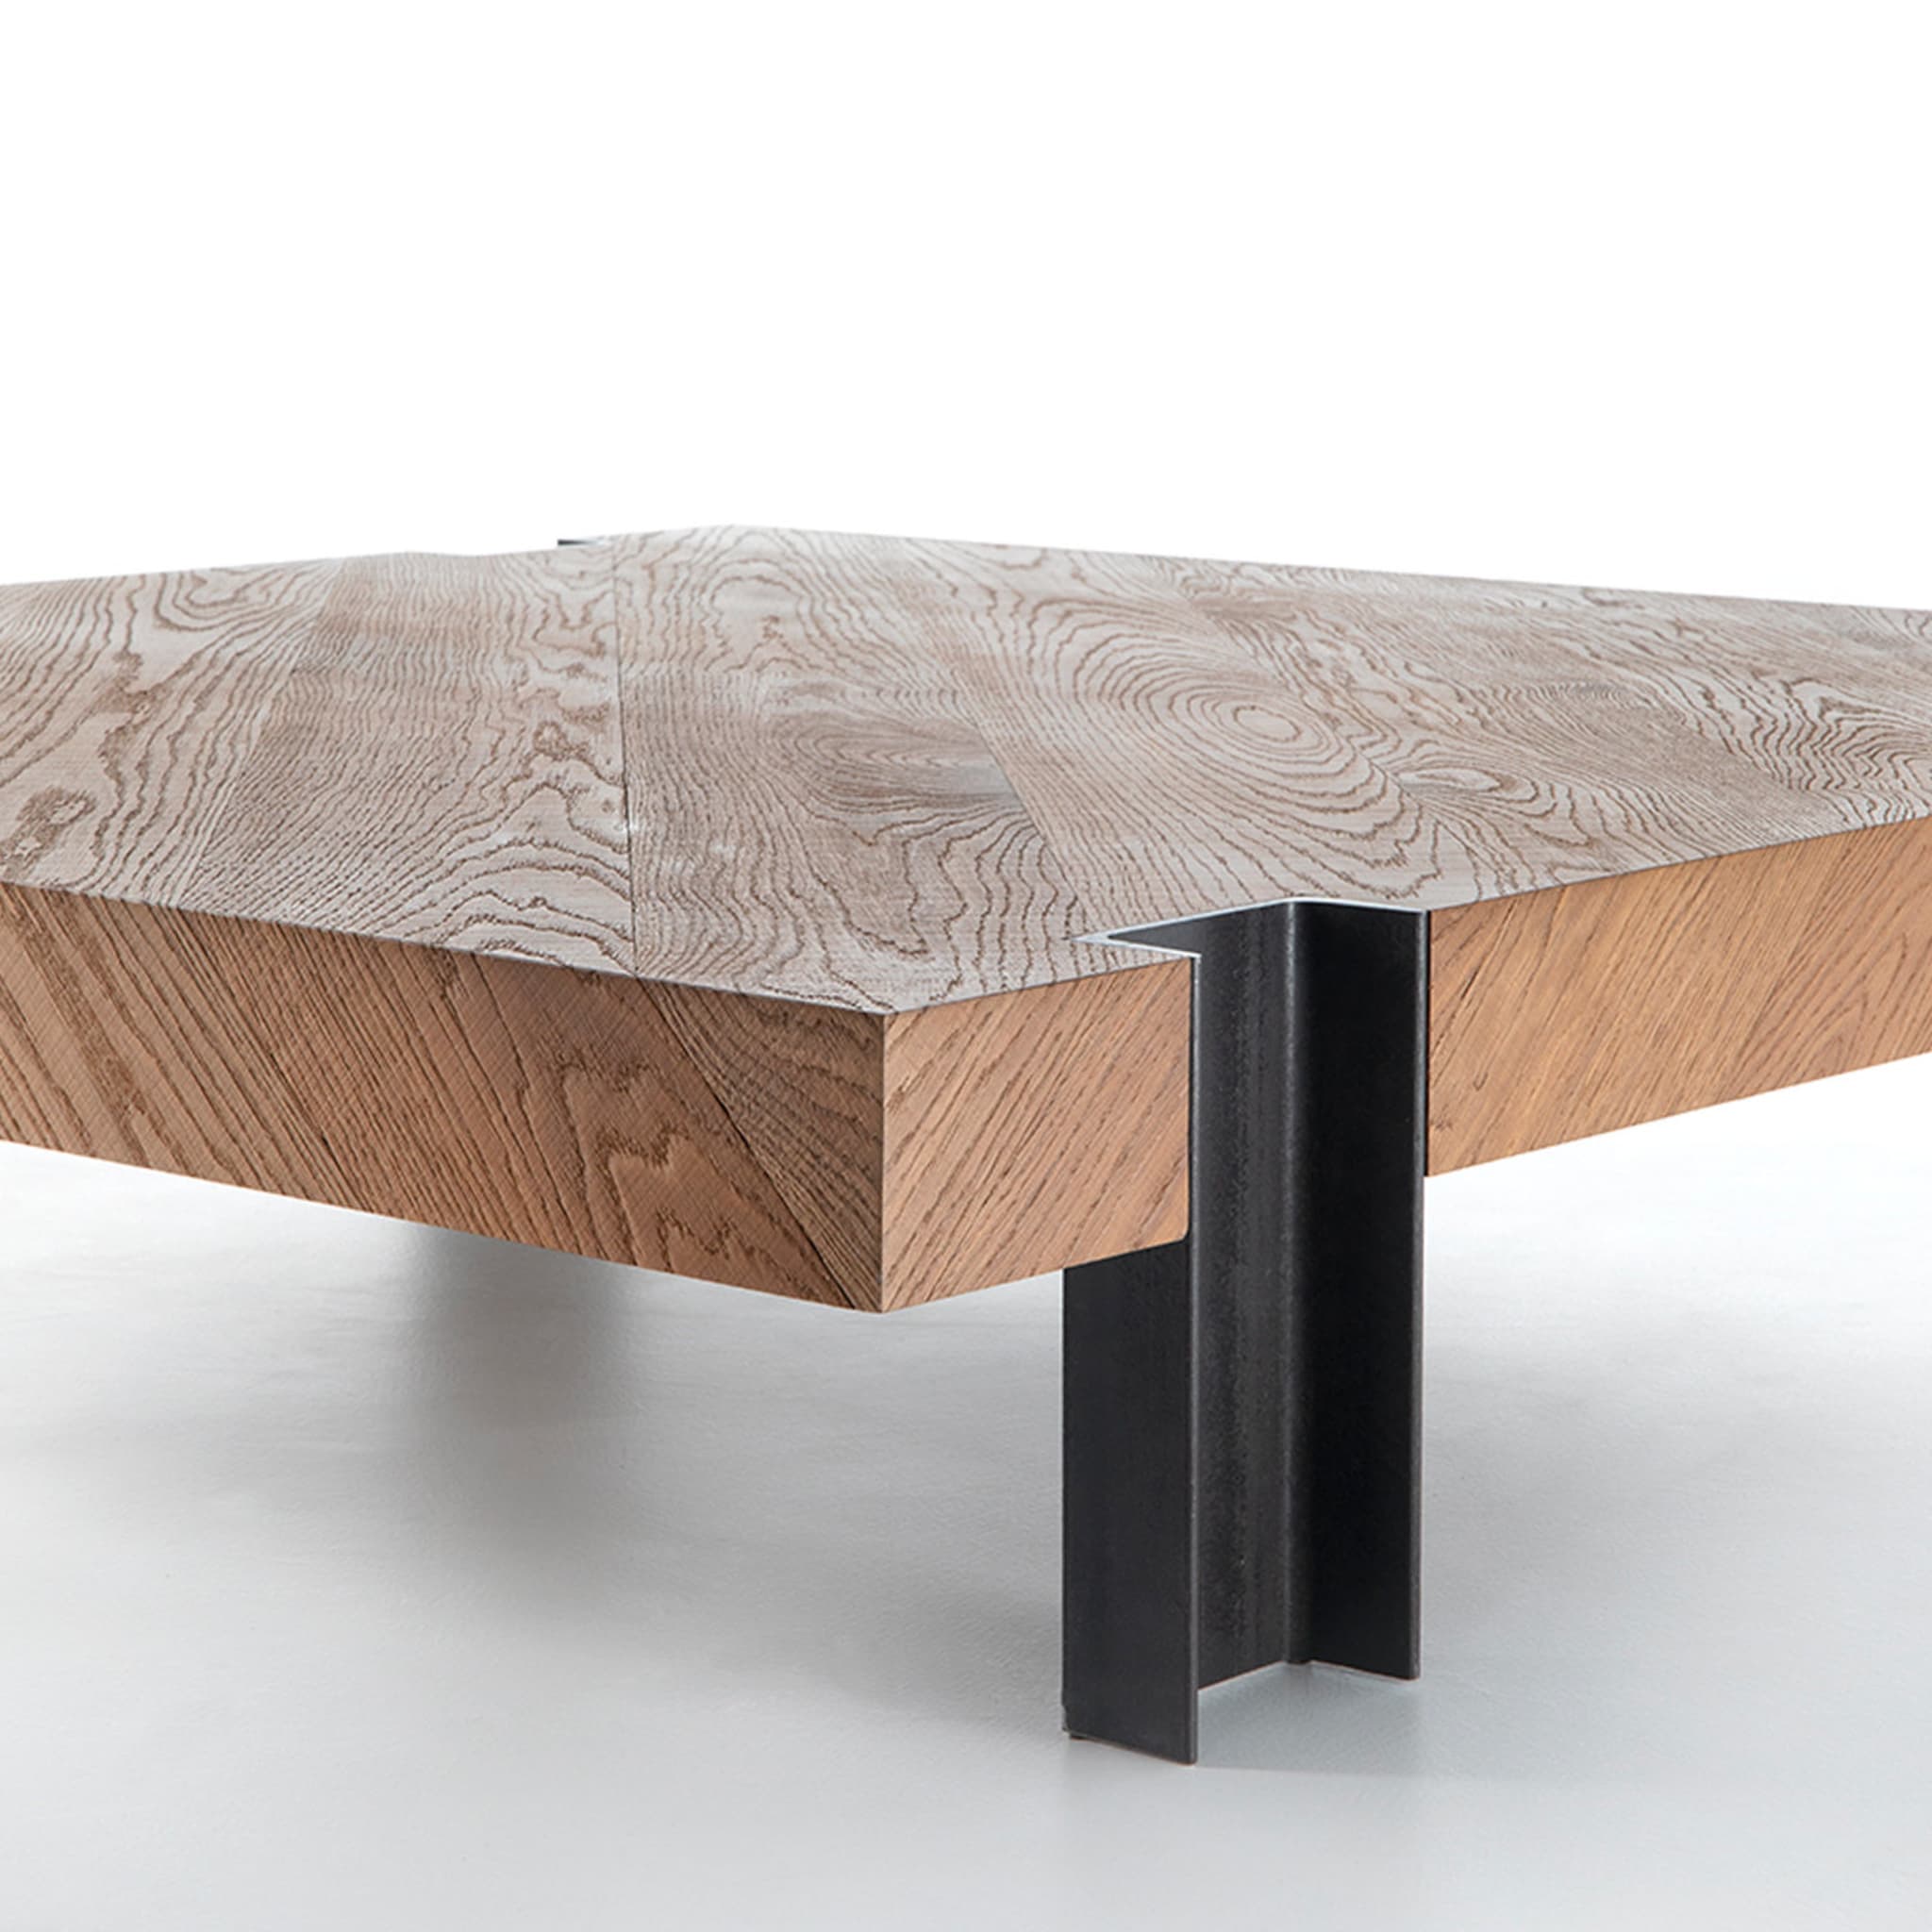 T50 Coffee Table by Jean-Michel Wilmotte - Alternative view 2